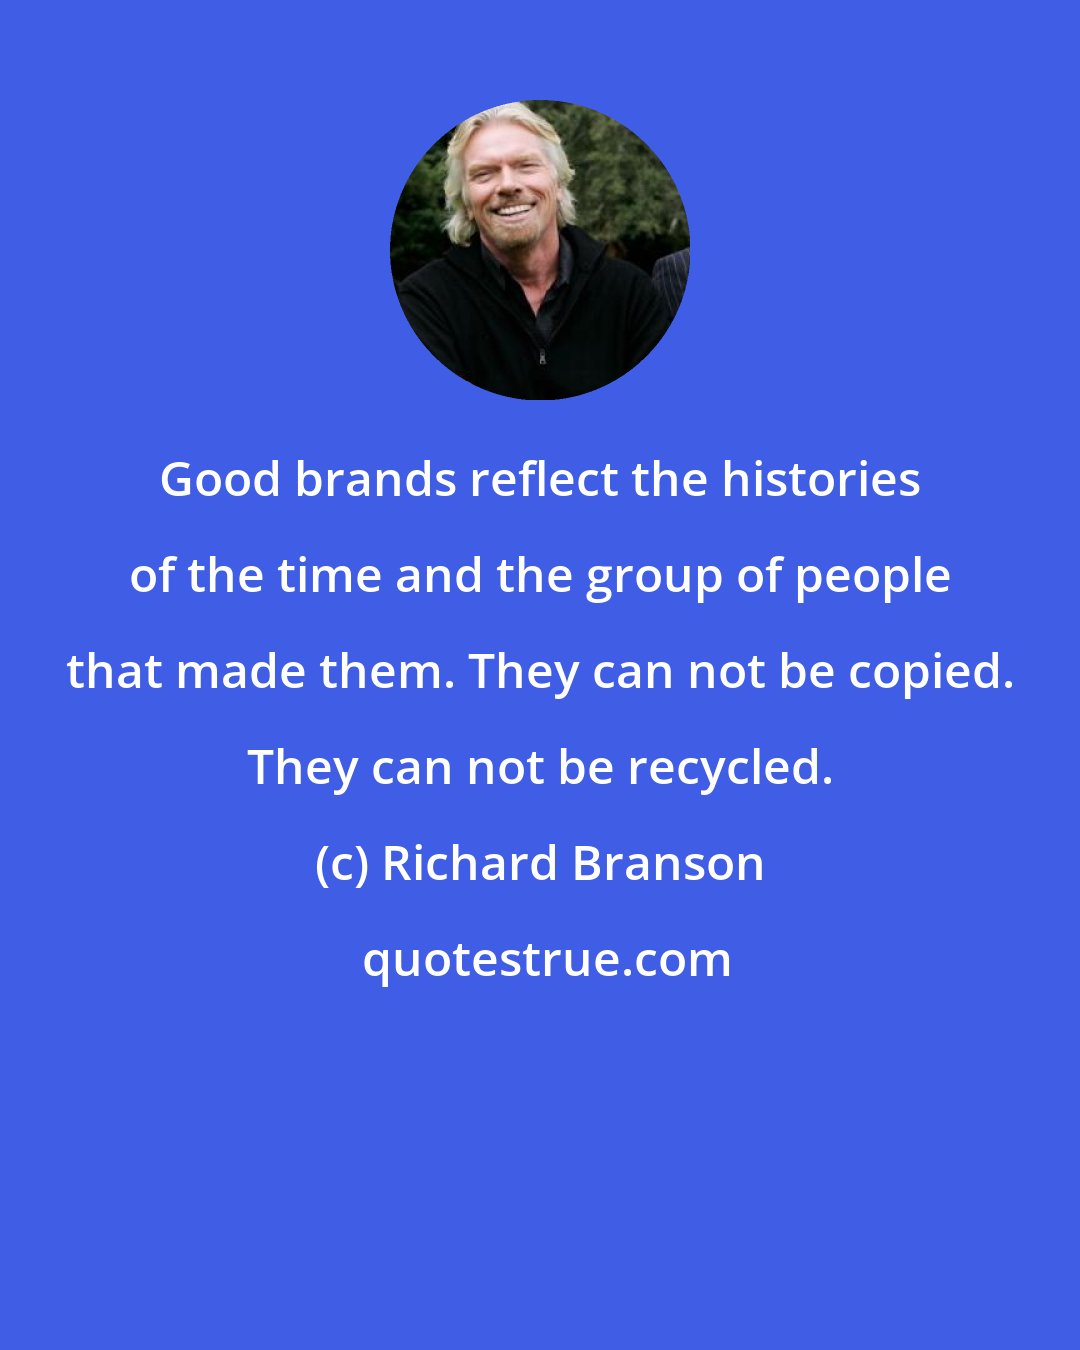 Richard Branson: Good brands reflect the histories of the time and the group of people that made them. They can not be copied. They can not be recycled.